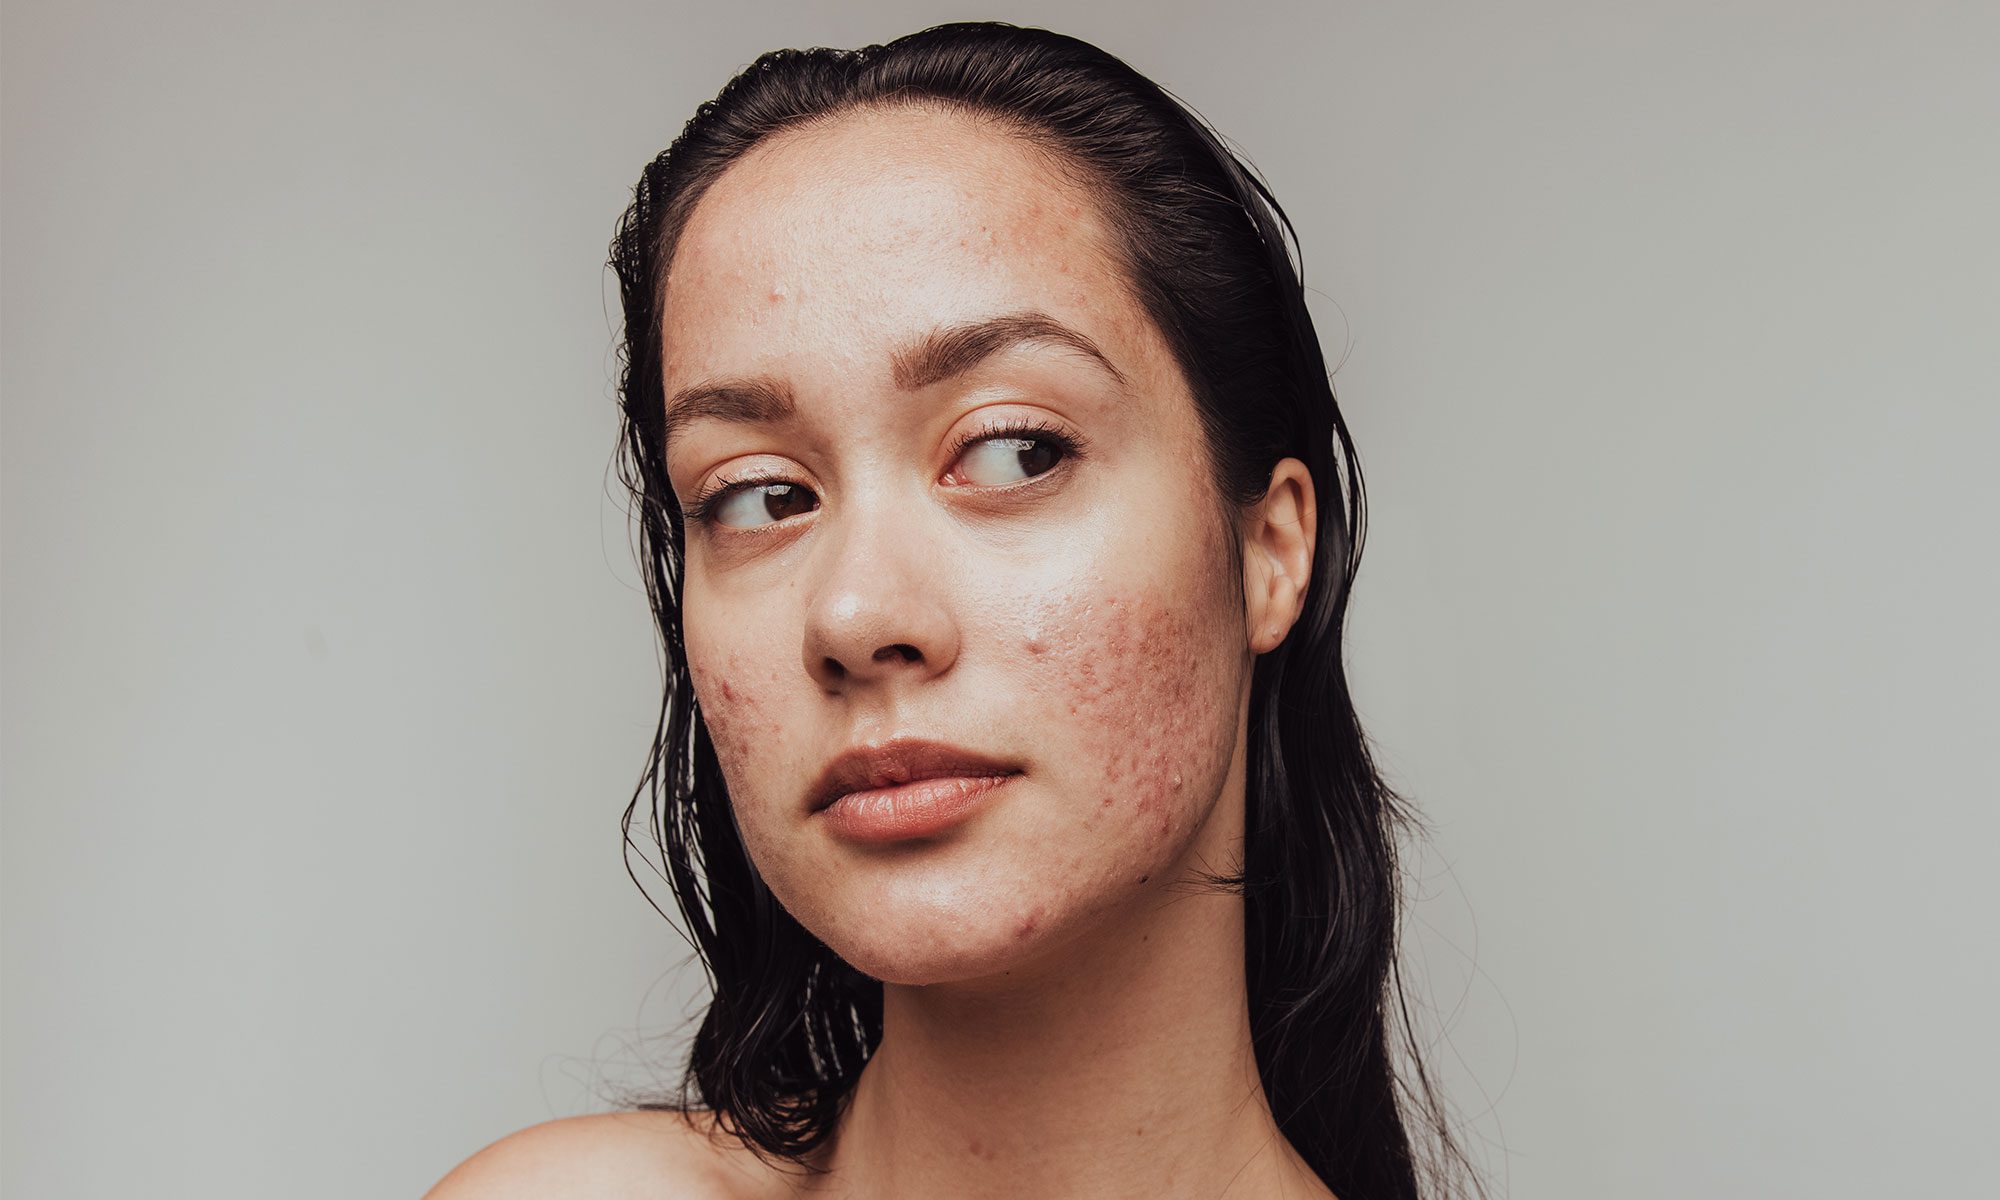 a profile photo of a woman with acne